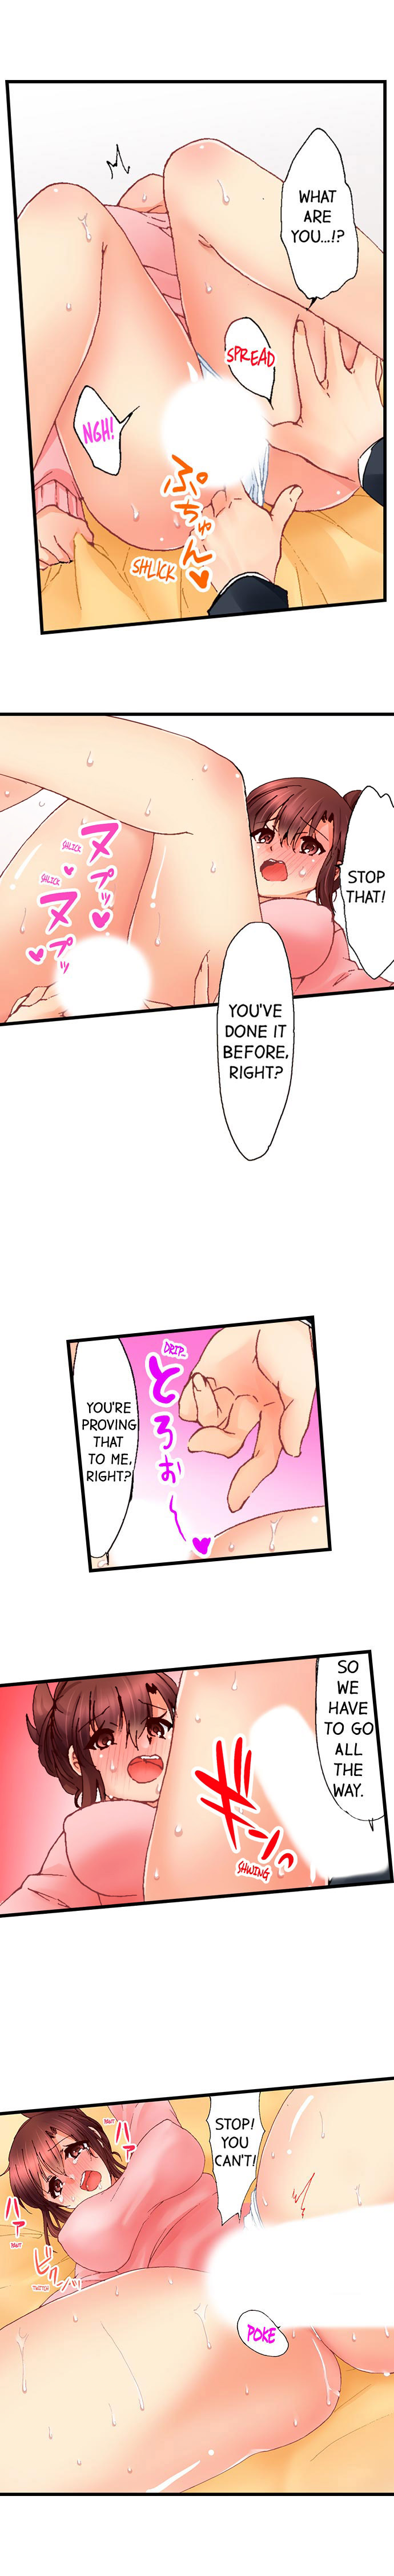 Touching My Older Sister Under the Table - Chapter 3 Page 9